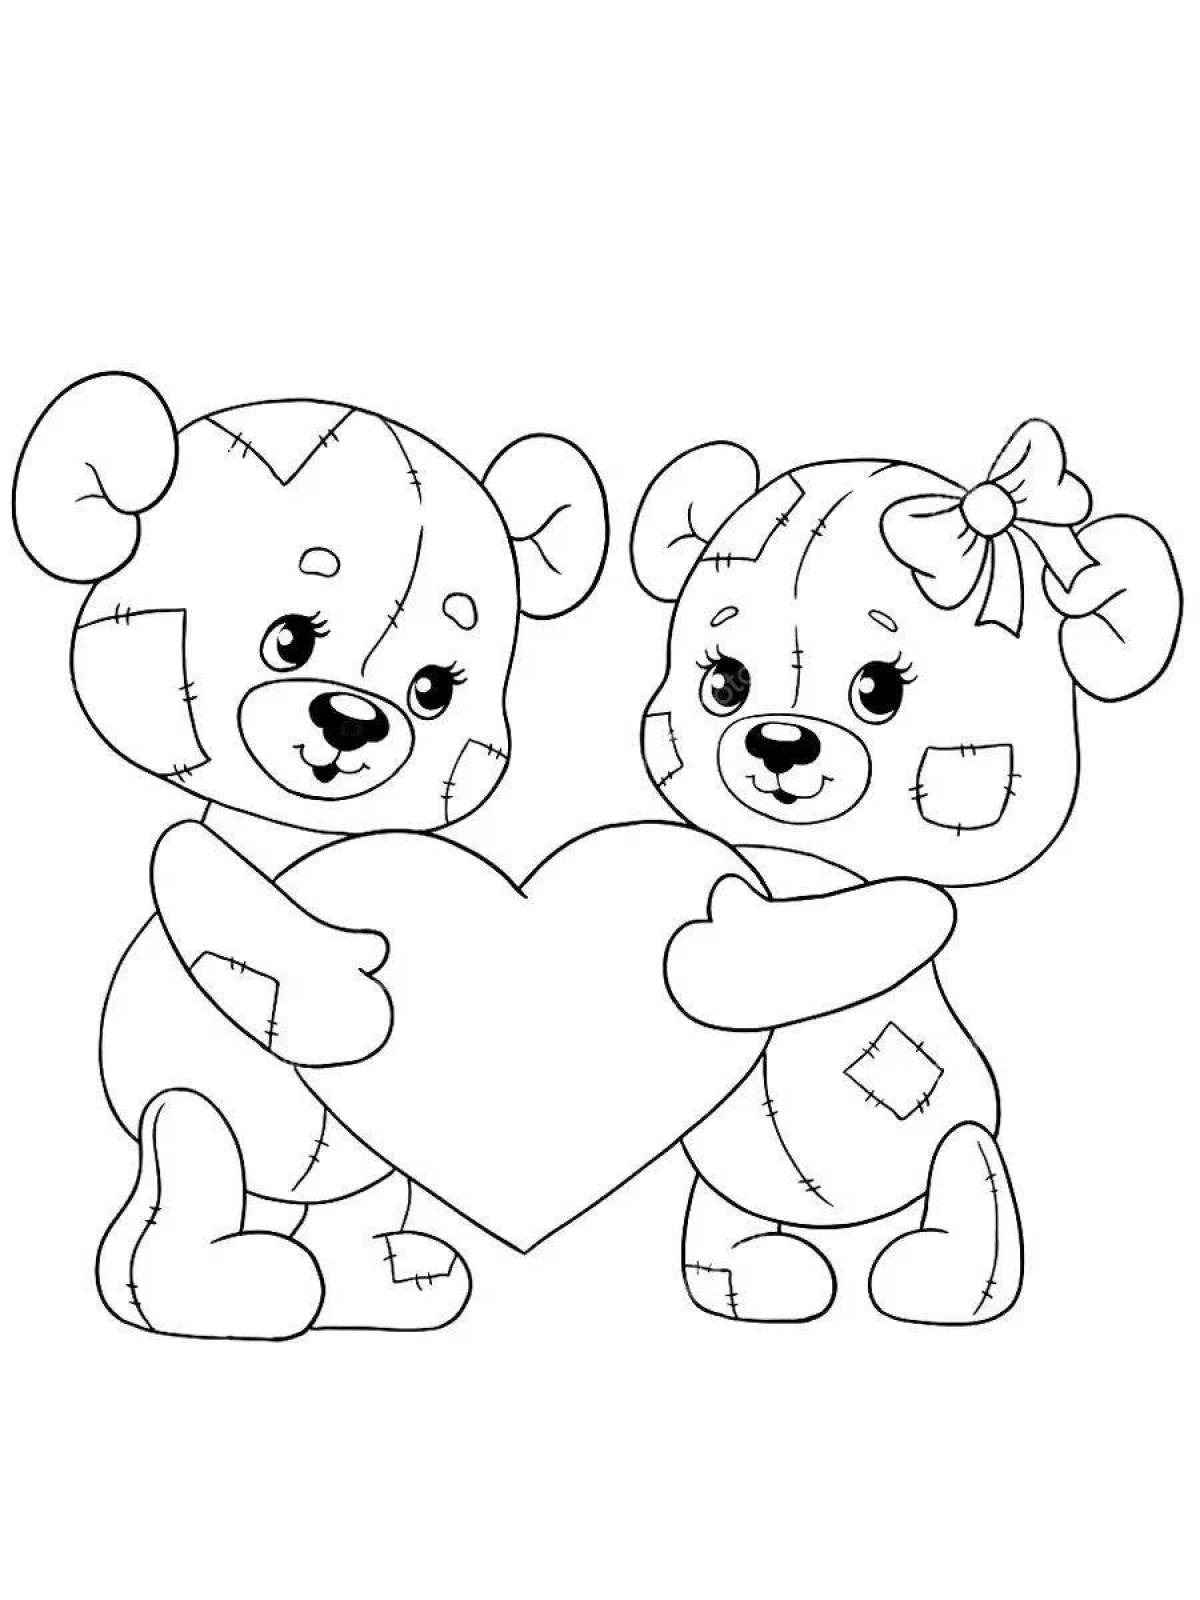 Cute and fluffy teddy bear coloring book